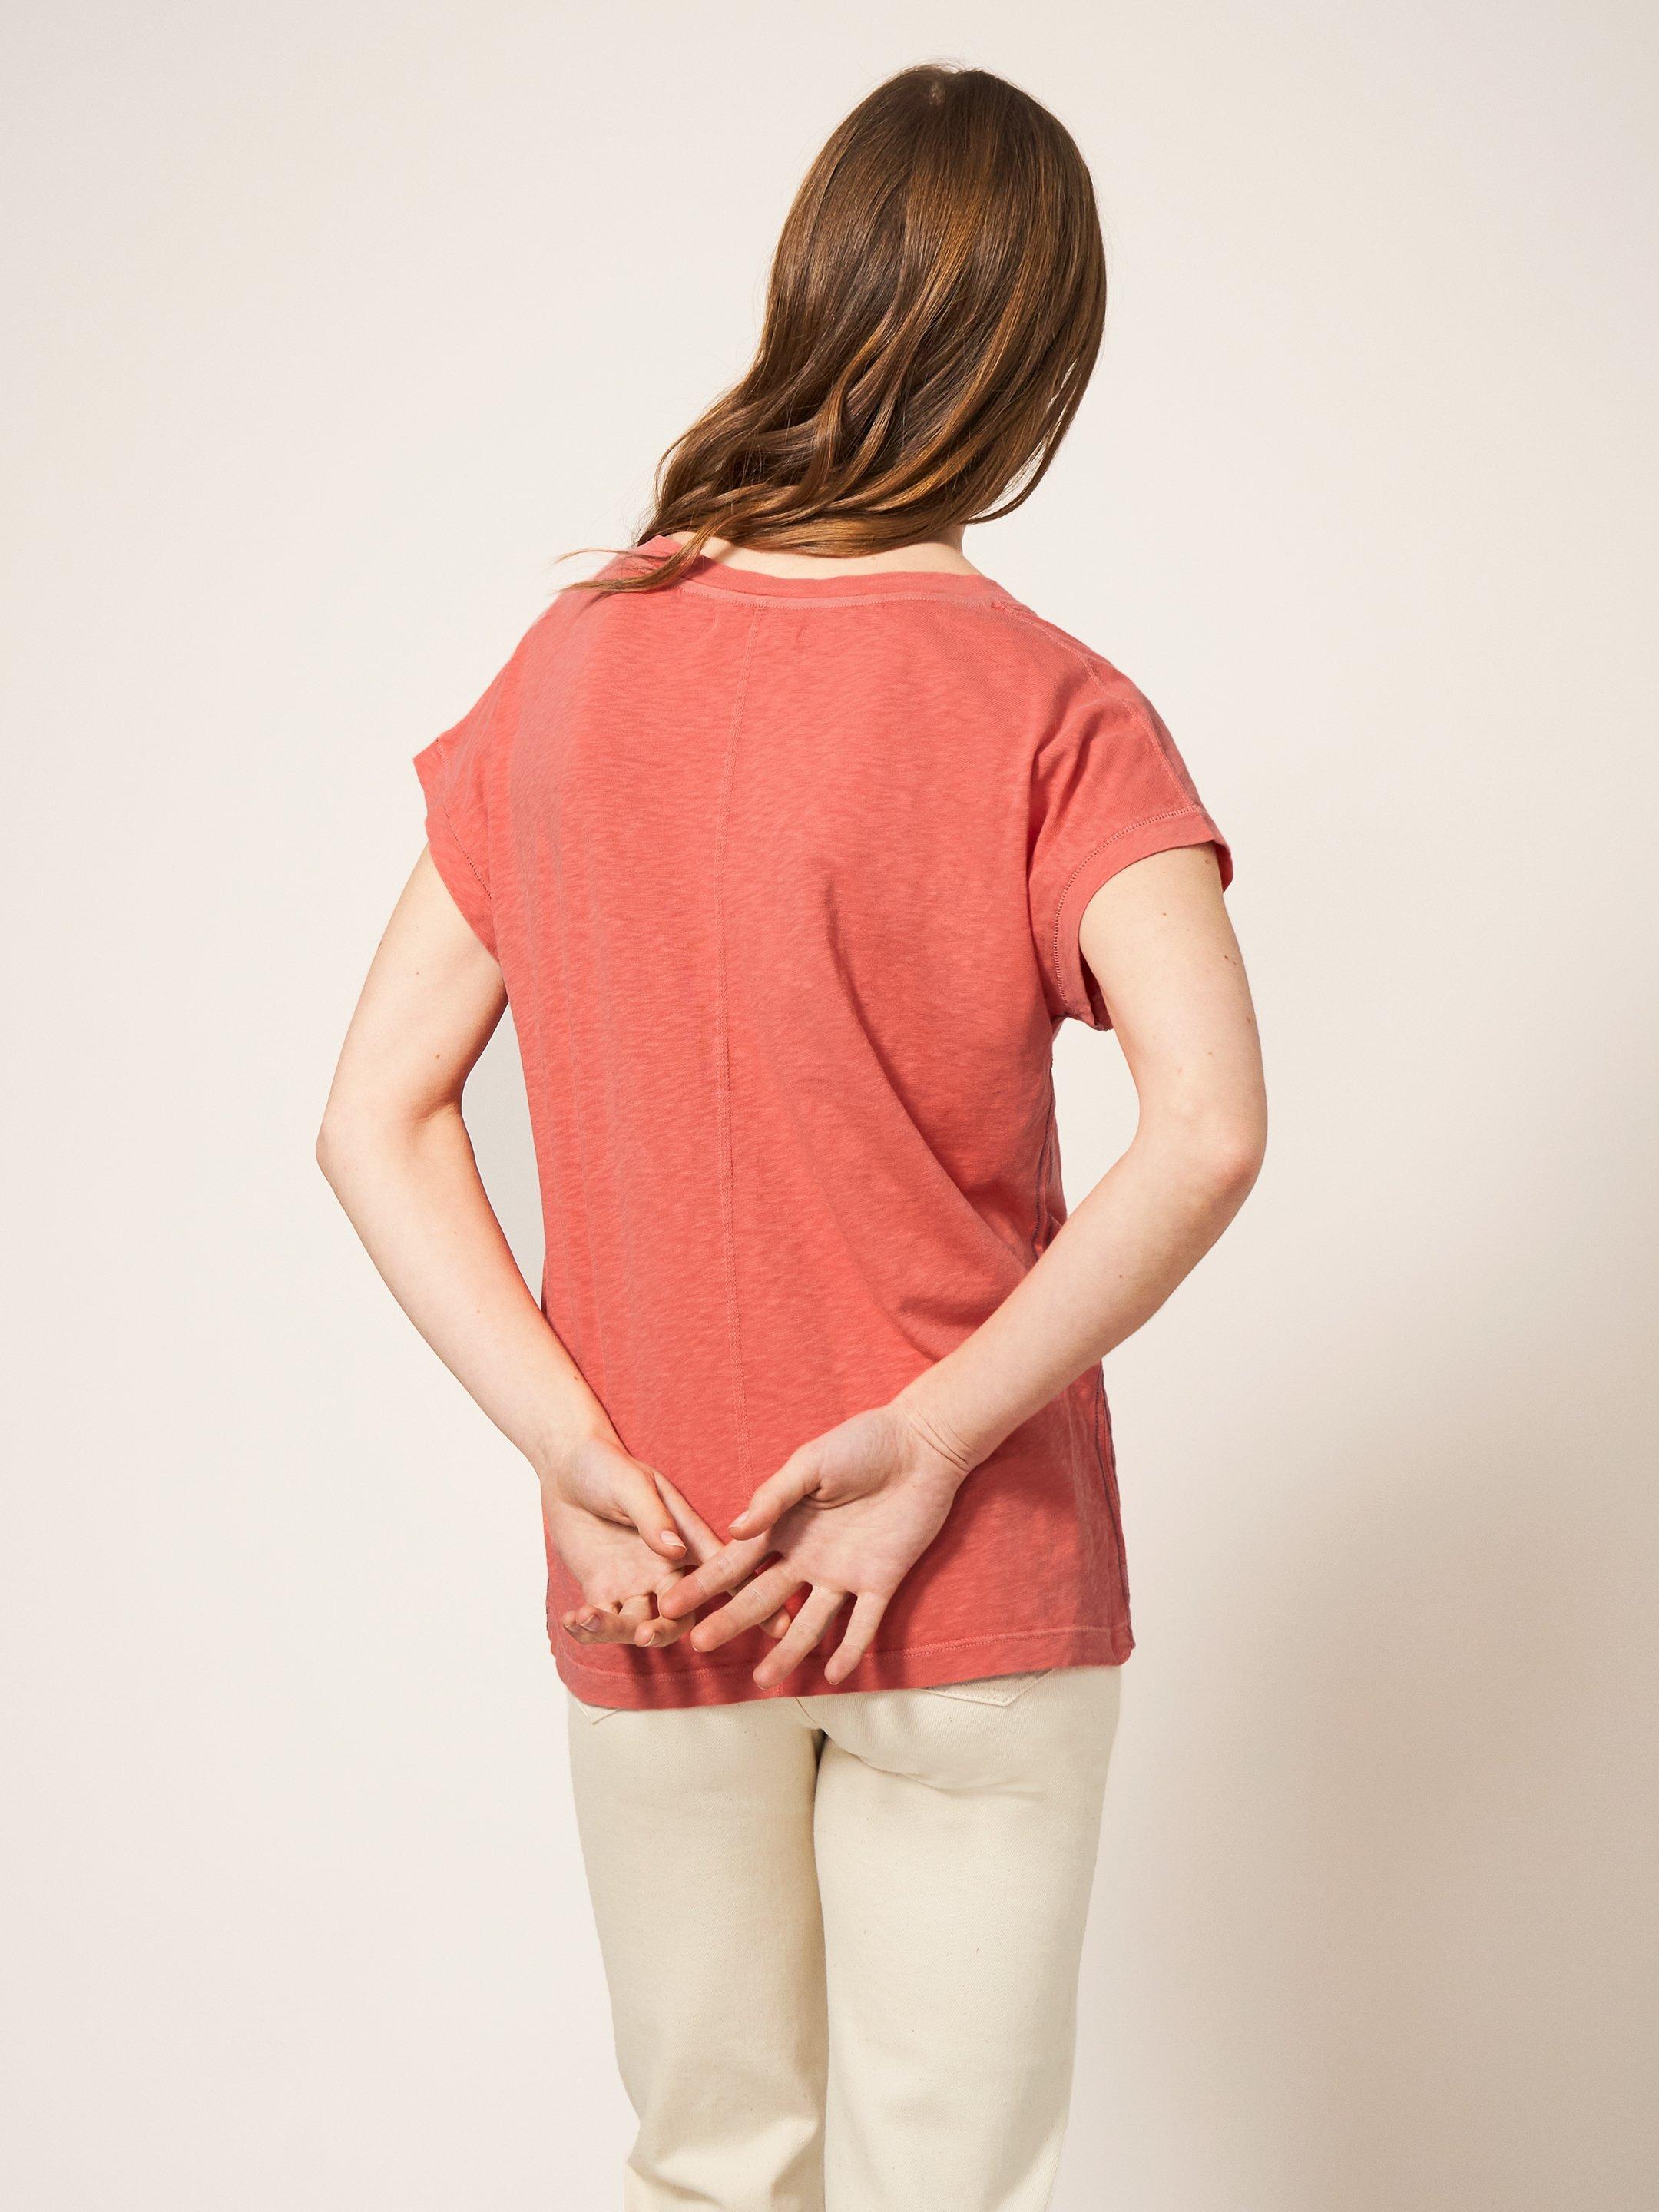 Nelly Notch Neck Tee in MID PINK - MODEL BACK